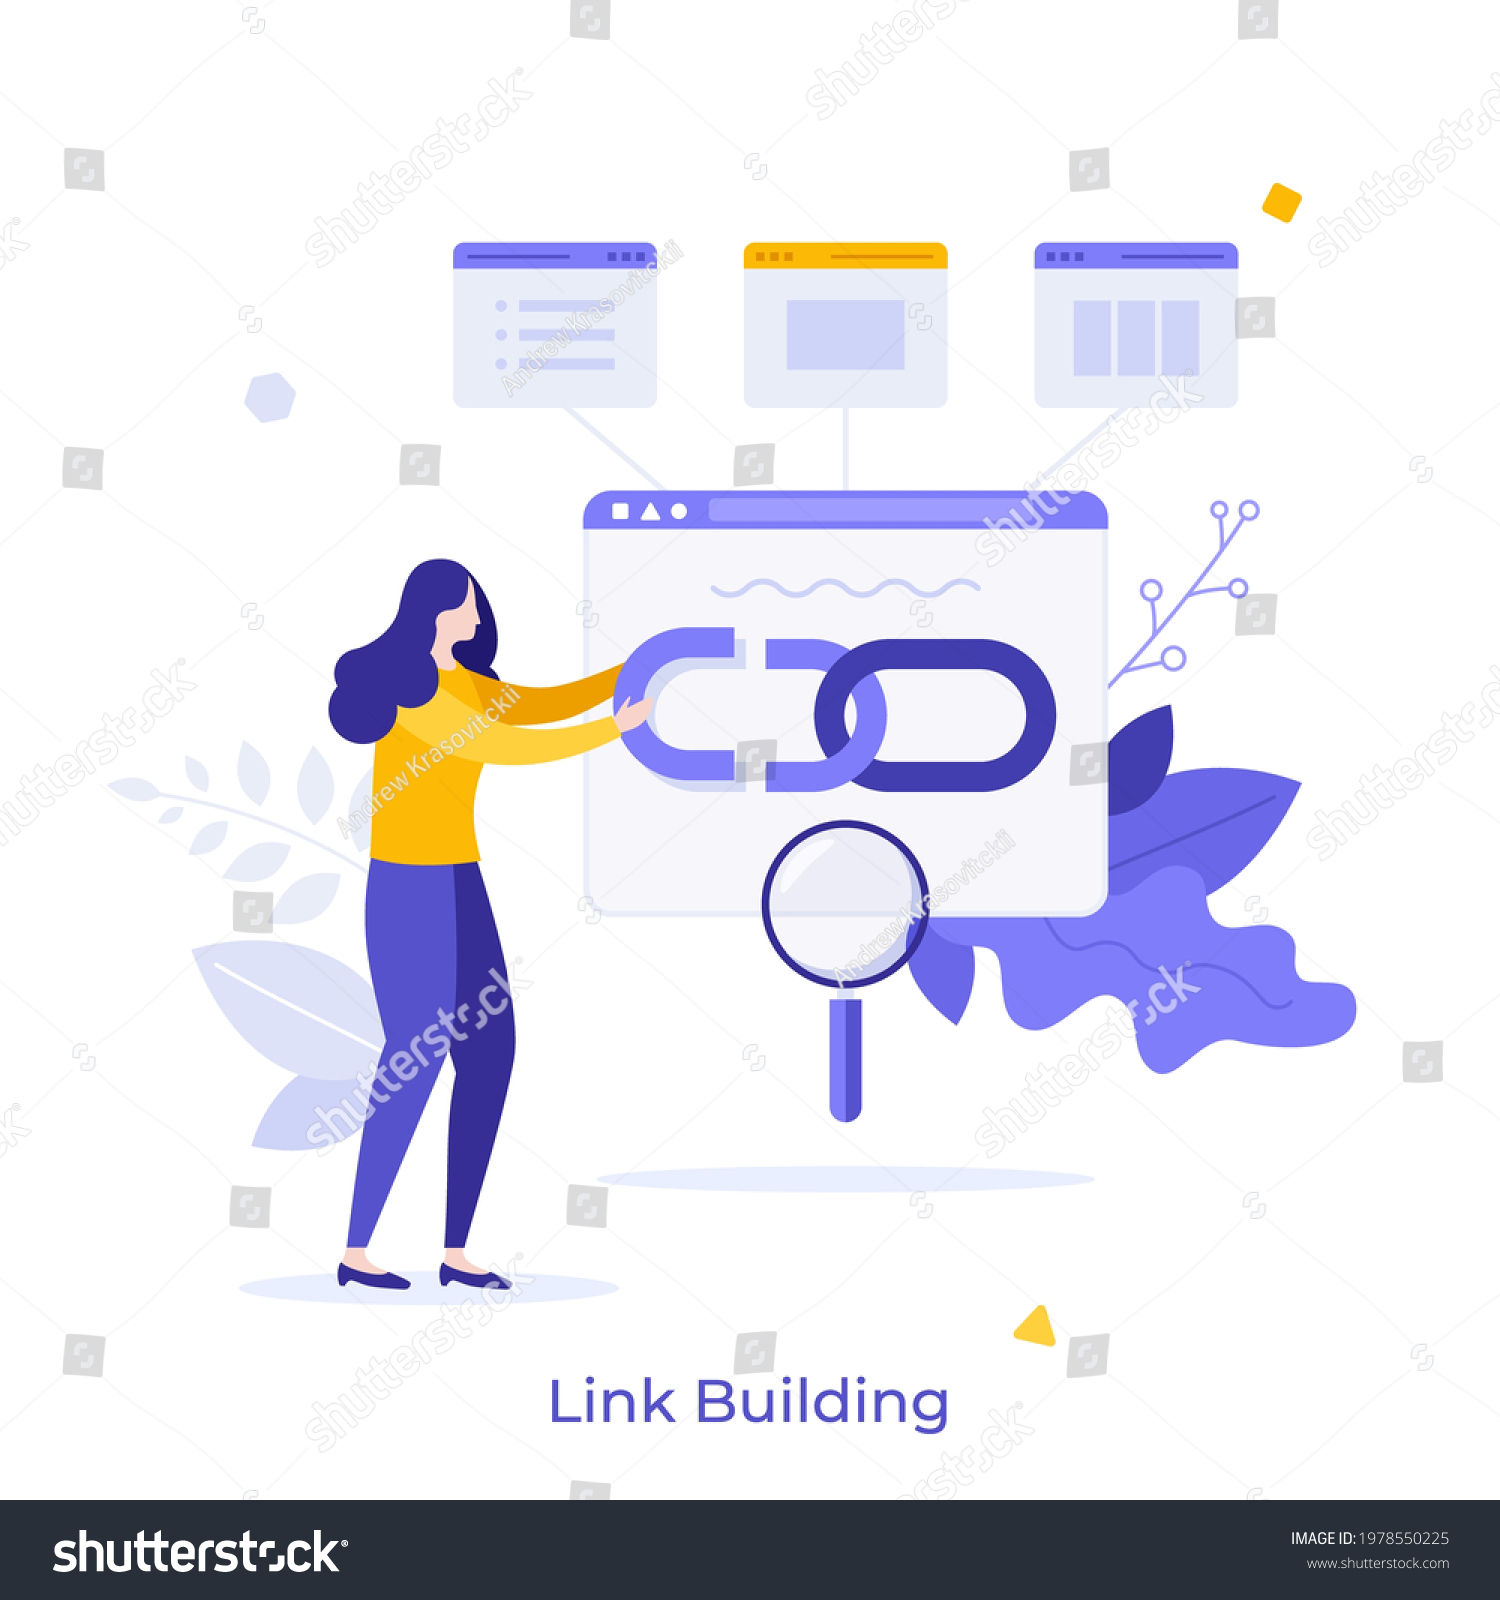 SVG of Woman holding chain on bowser window. Concept of link building for search engine optimization, acquiring hyperlinks from websites to get traffic. Modern flat colorful vector illustration for banner. svg